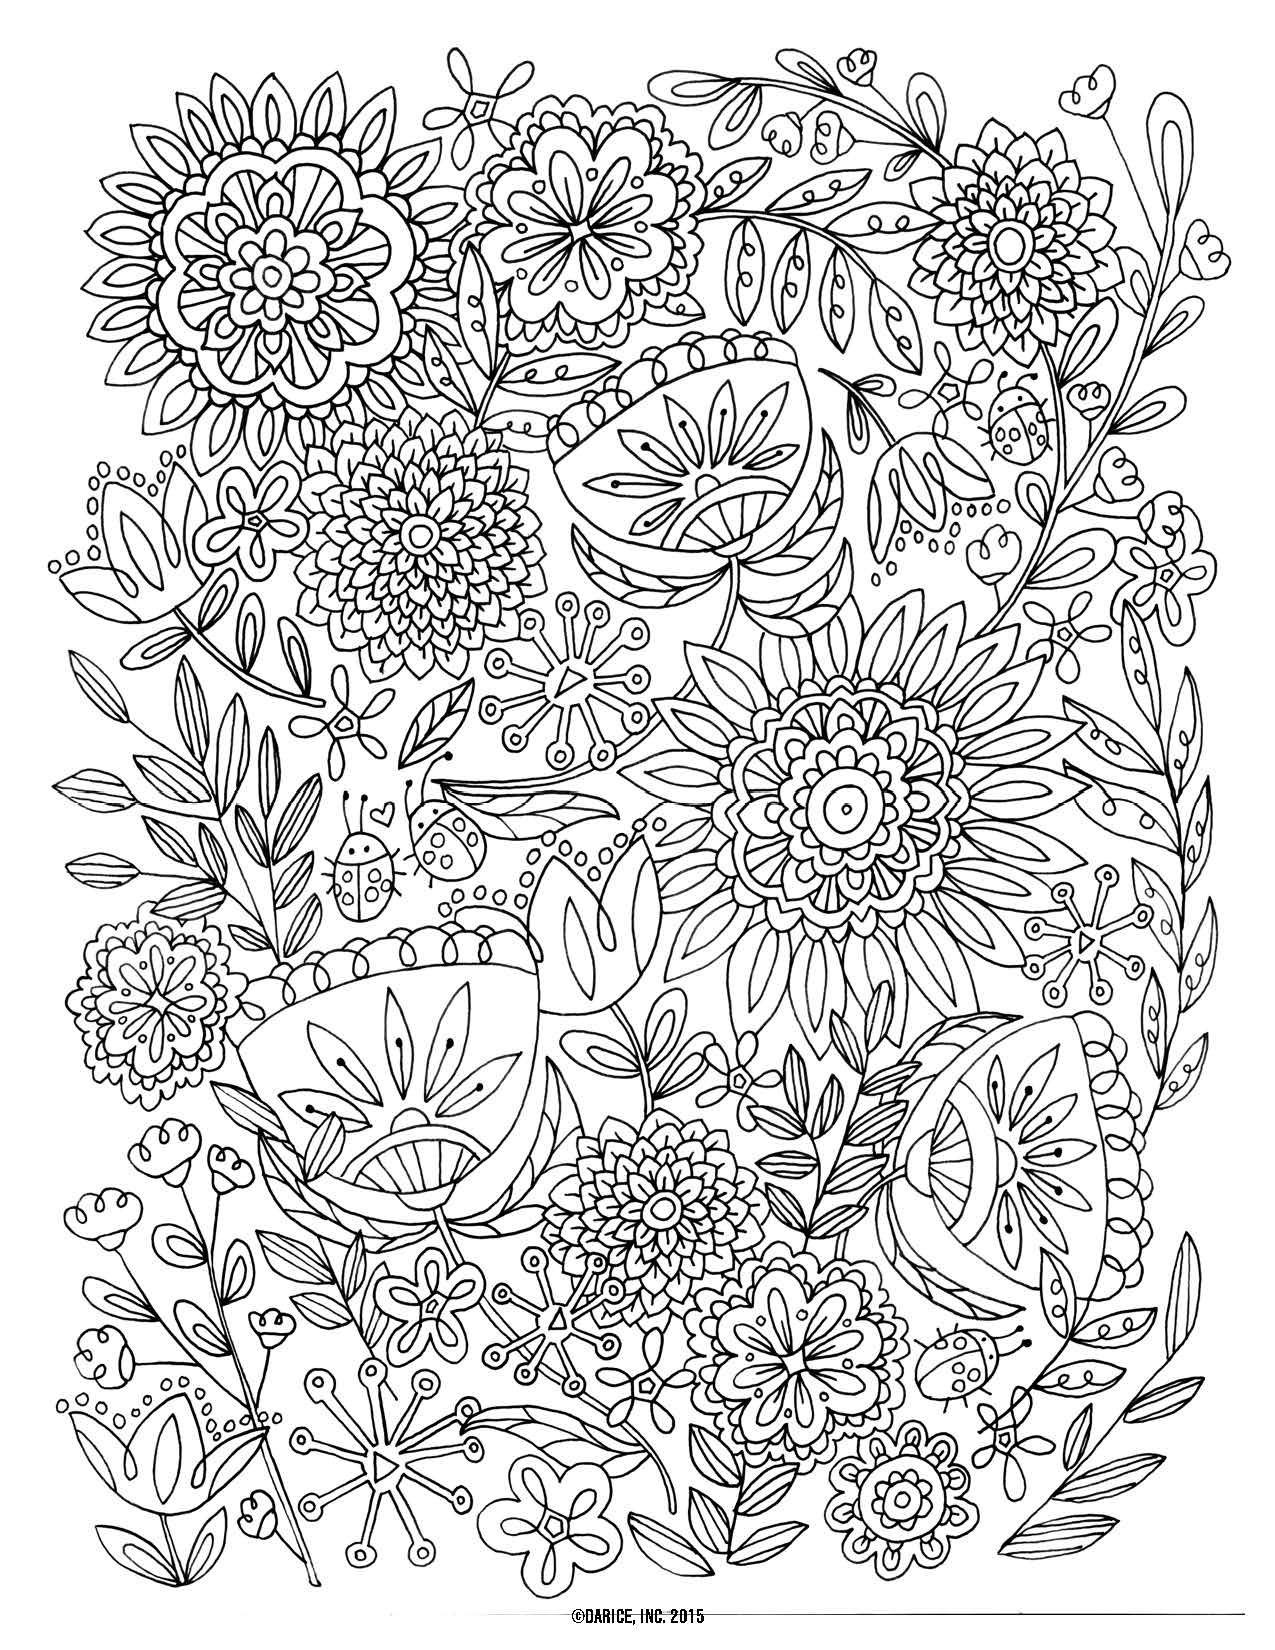 23 Recommended Flowers with Vase Included 2024 free download flowers with vase included of cool vases flower vase coloring page pages flowers in a top i 0d ruva pertaining to cool vases flower vase coloring page pages flowers in a top i 0d